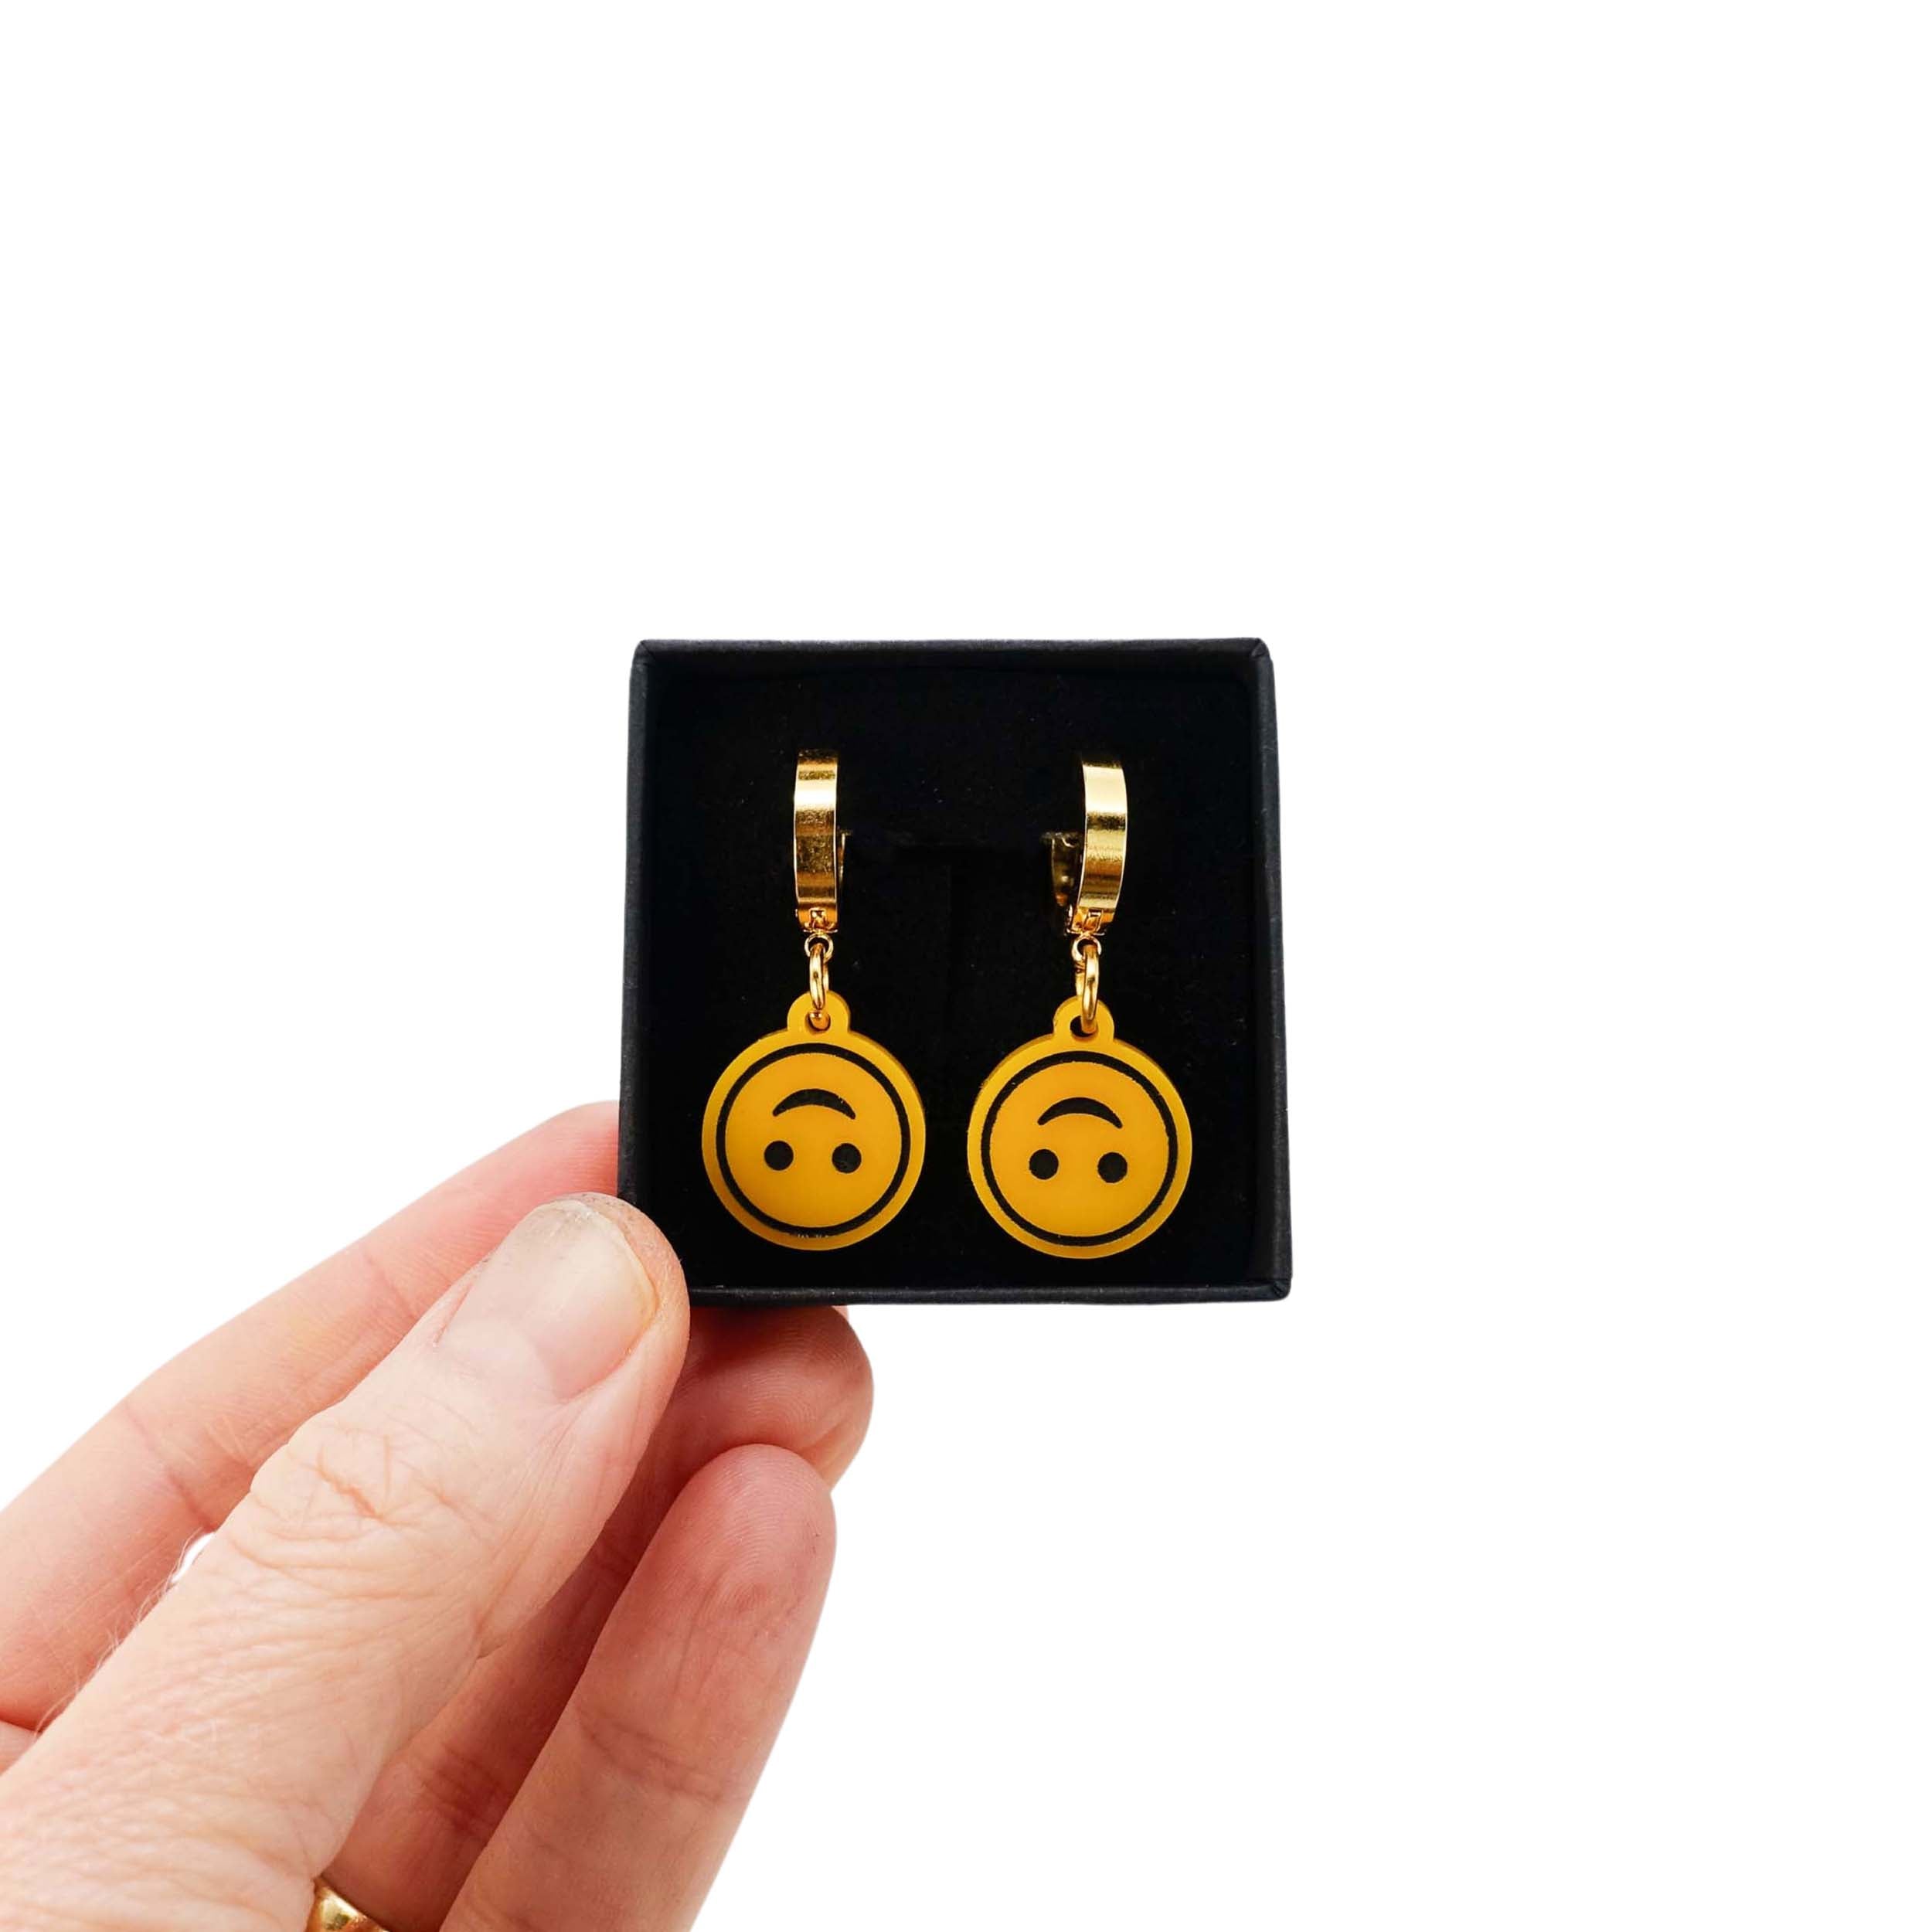 Upside-down smiley face earrings on gold  huggie hoops, shown held up in a Wear and Resist gift box.